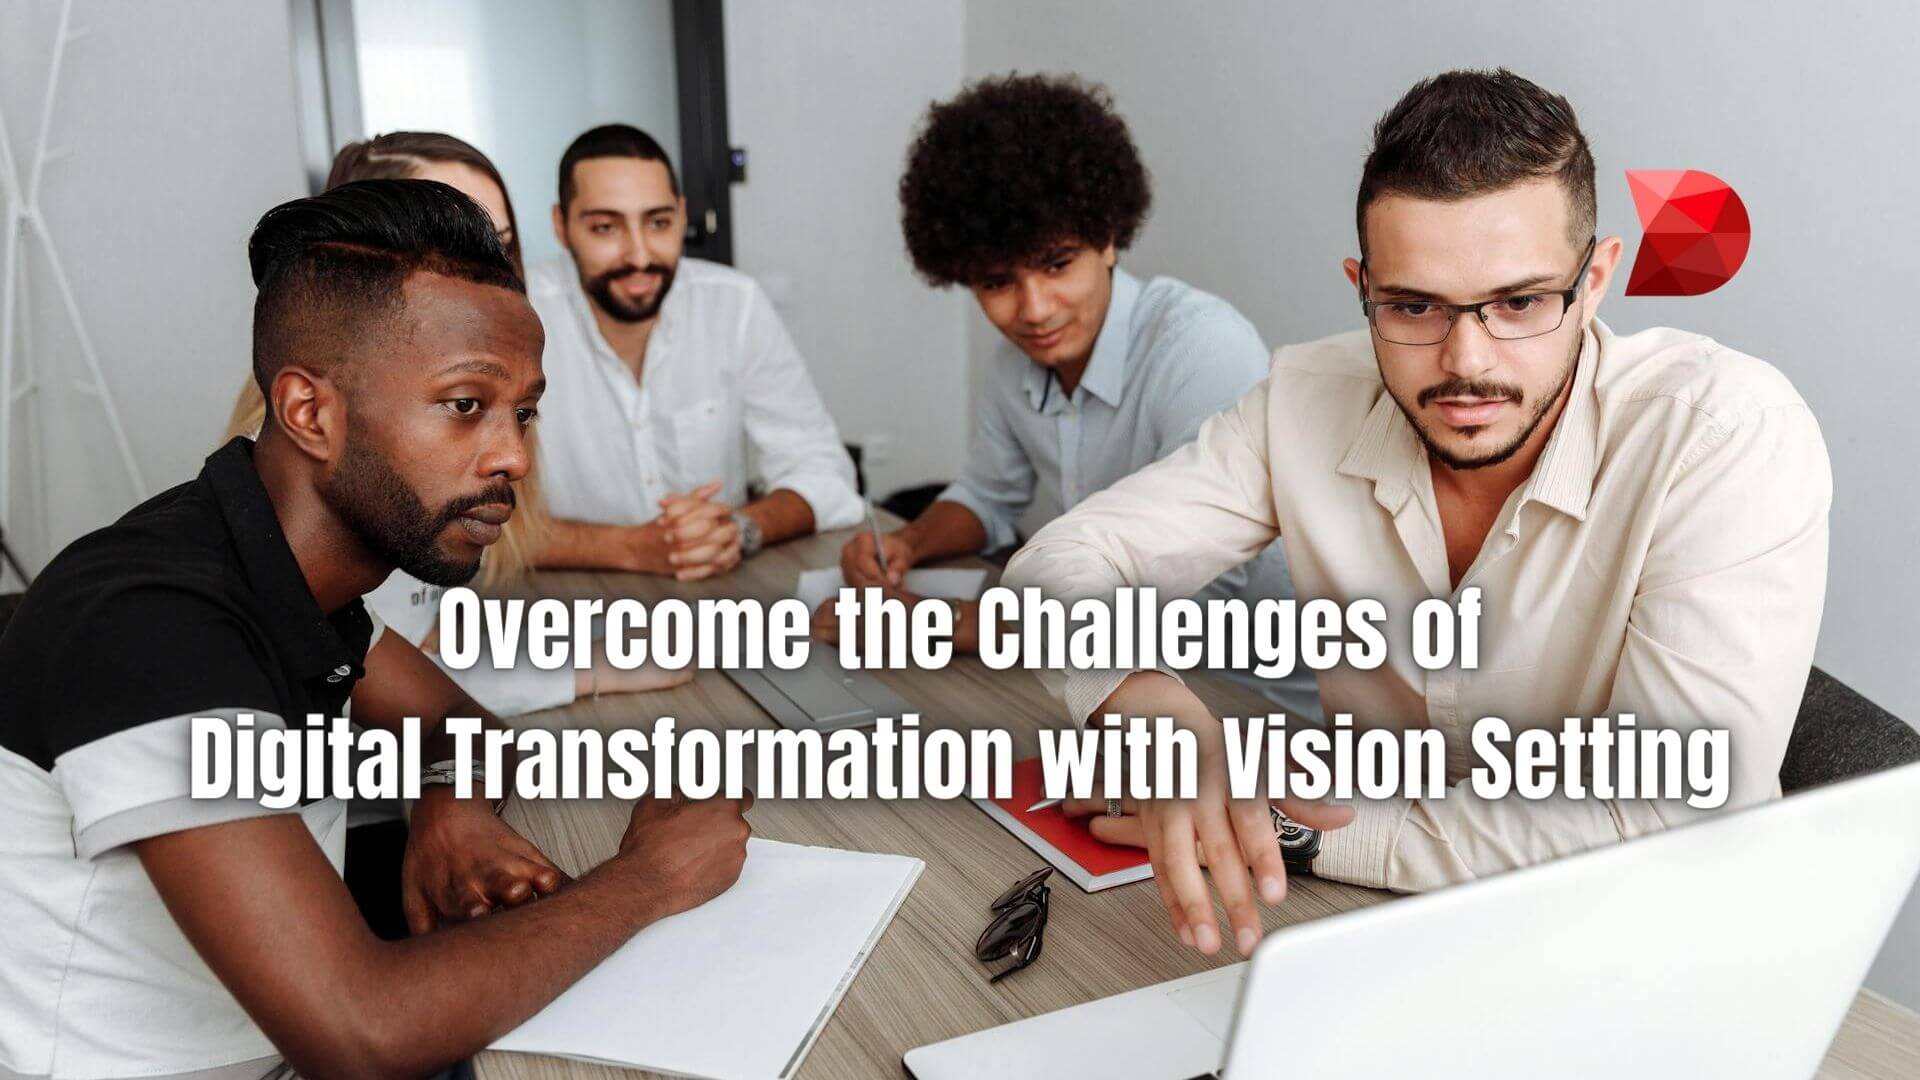 Empower your digital transformation with effective vision setting strategies. Click here to learn how to conquer transformation hurdles.